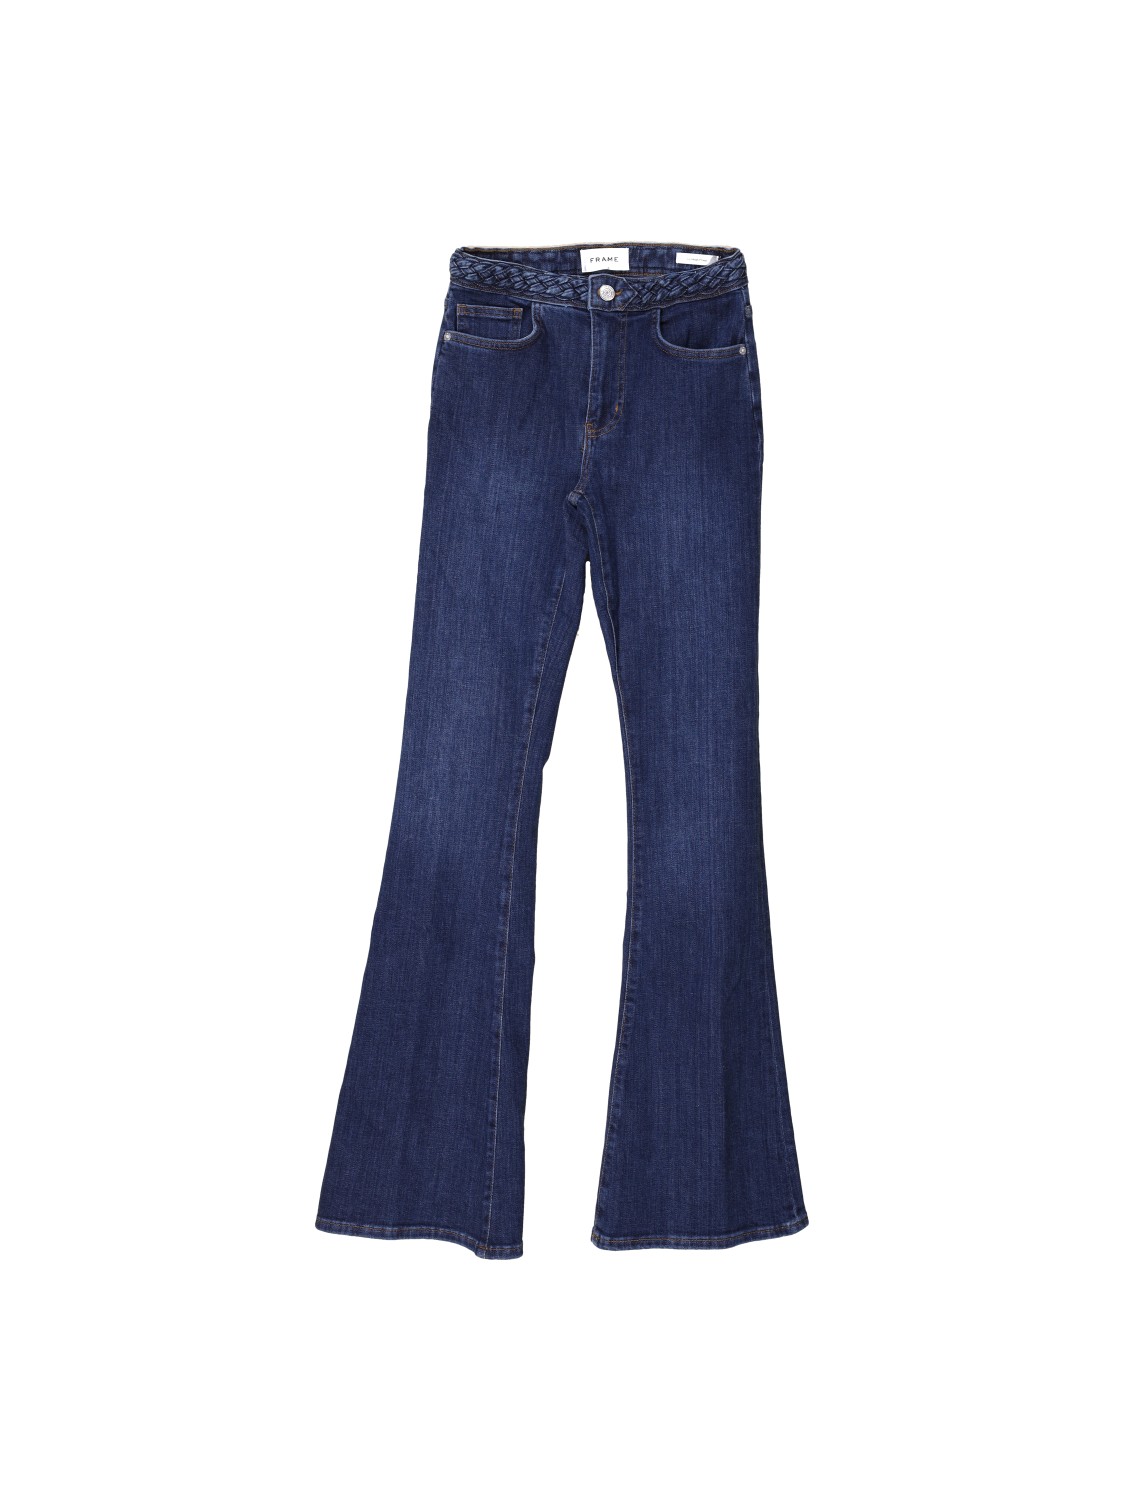 Braided Waistband – Stretchy cotton jeans with a flare 